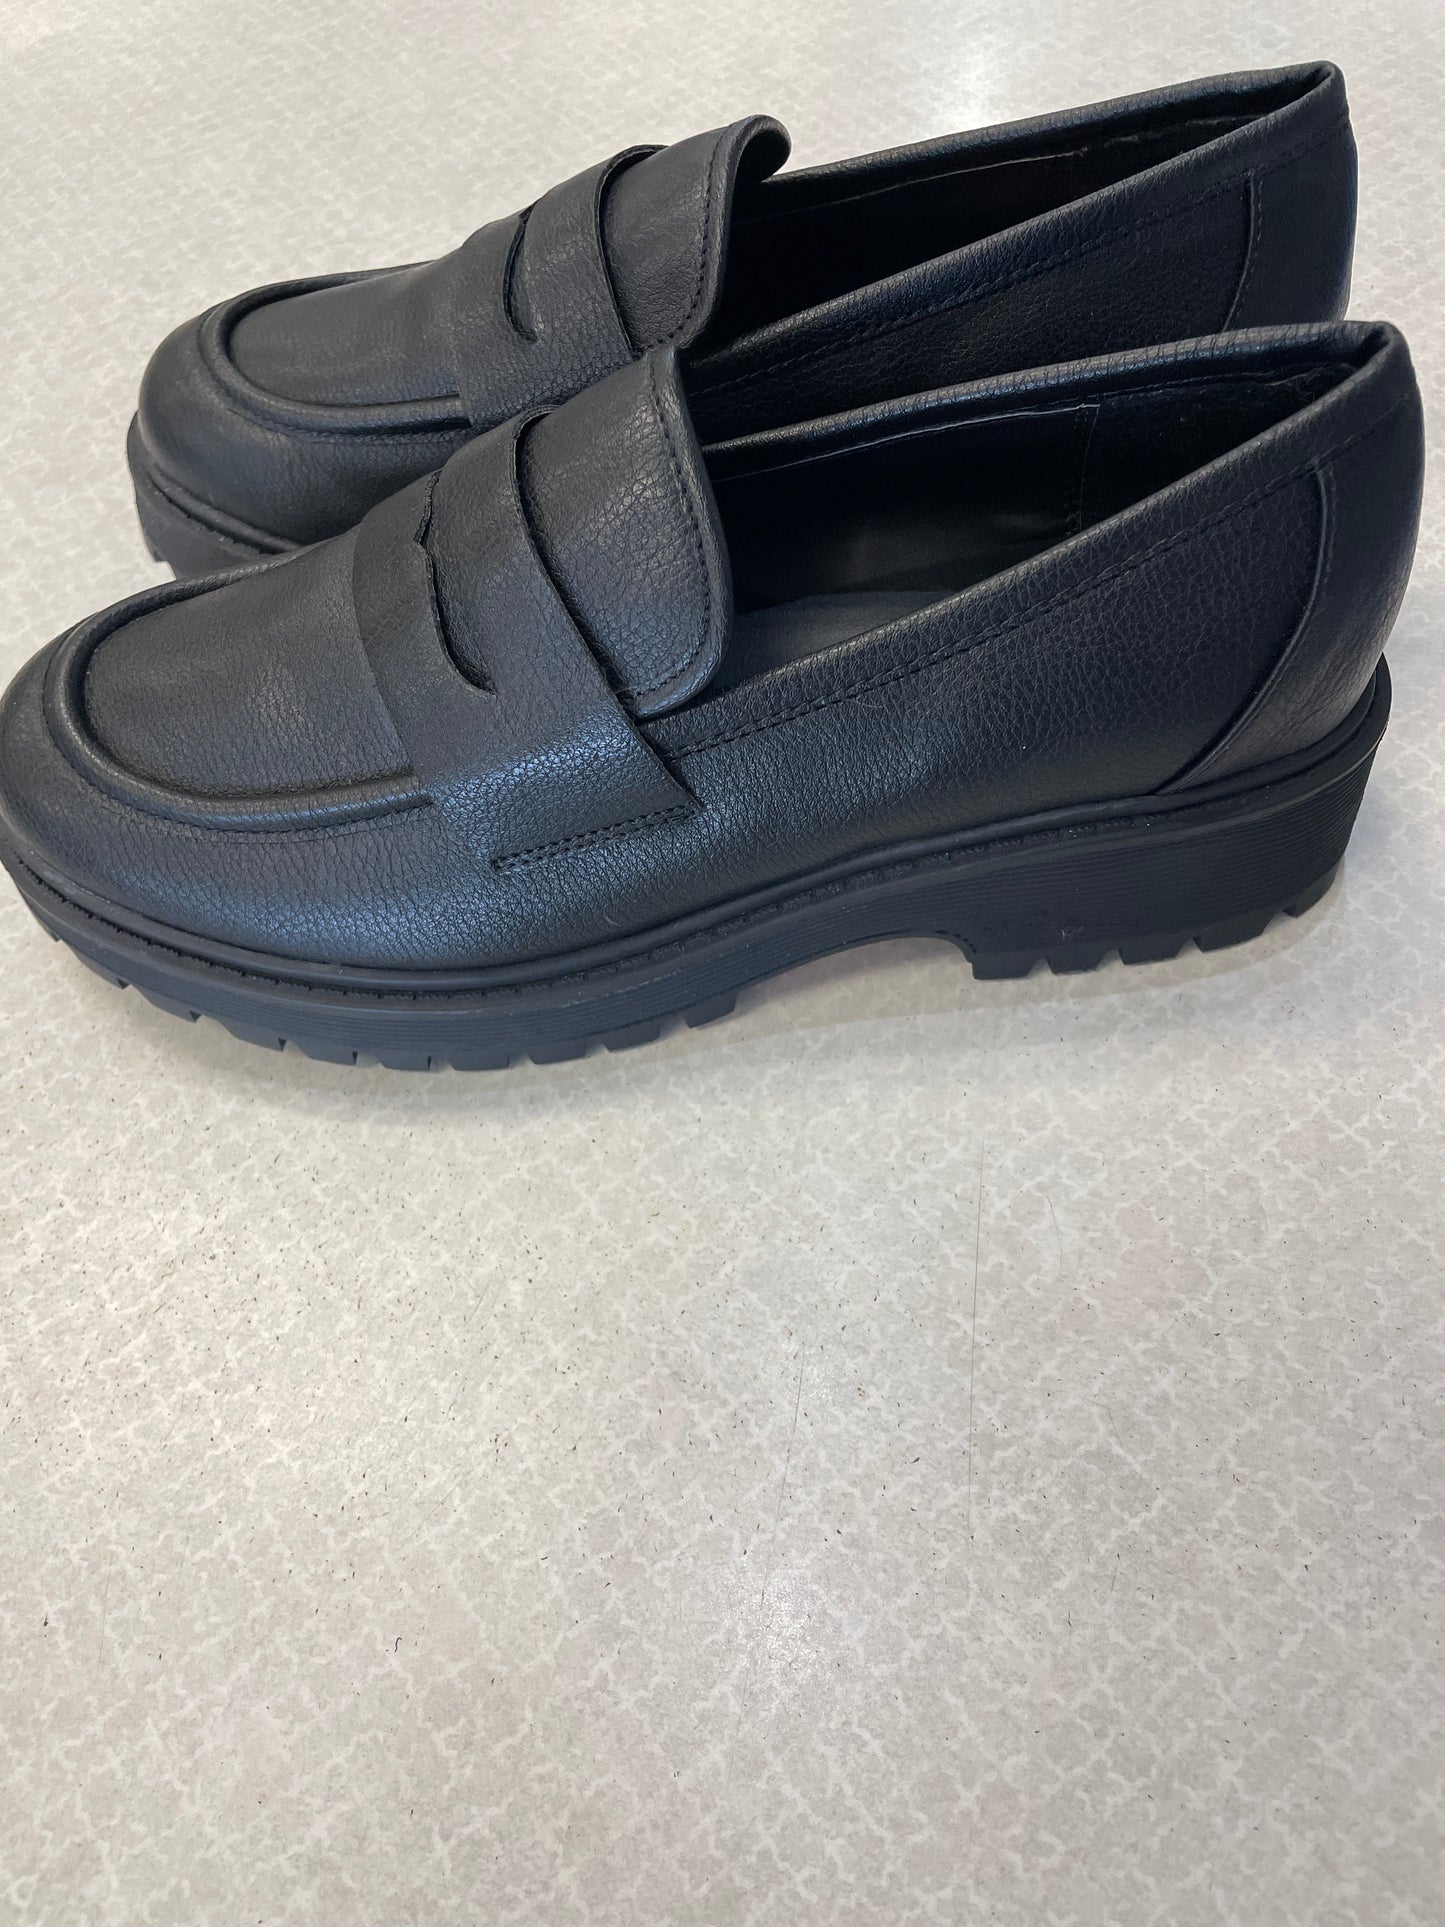 Shoes Heels Platform By Union Bay  Size: 9